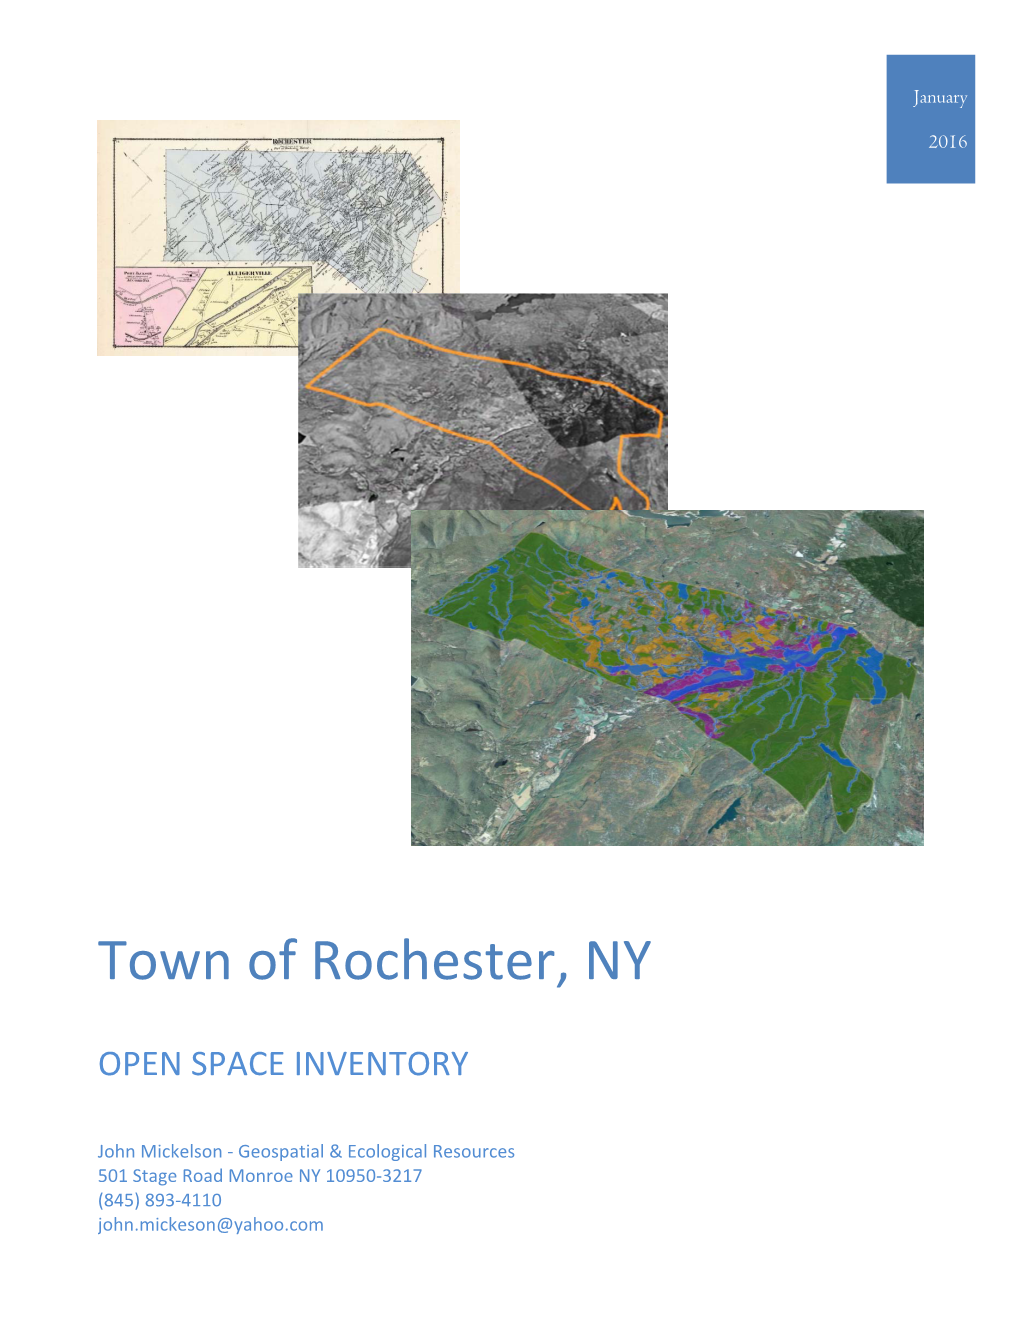 Open Space Inventory